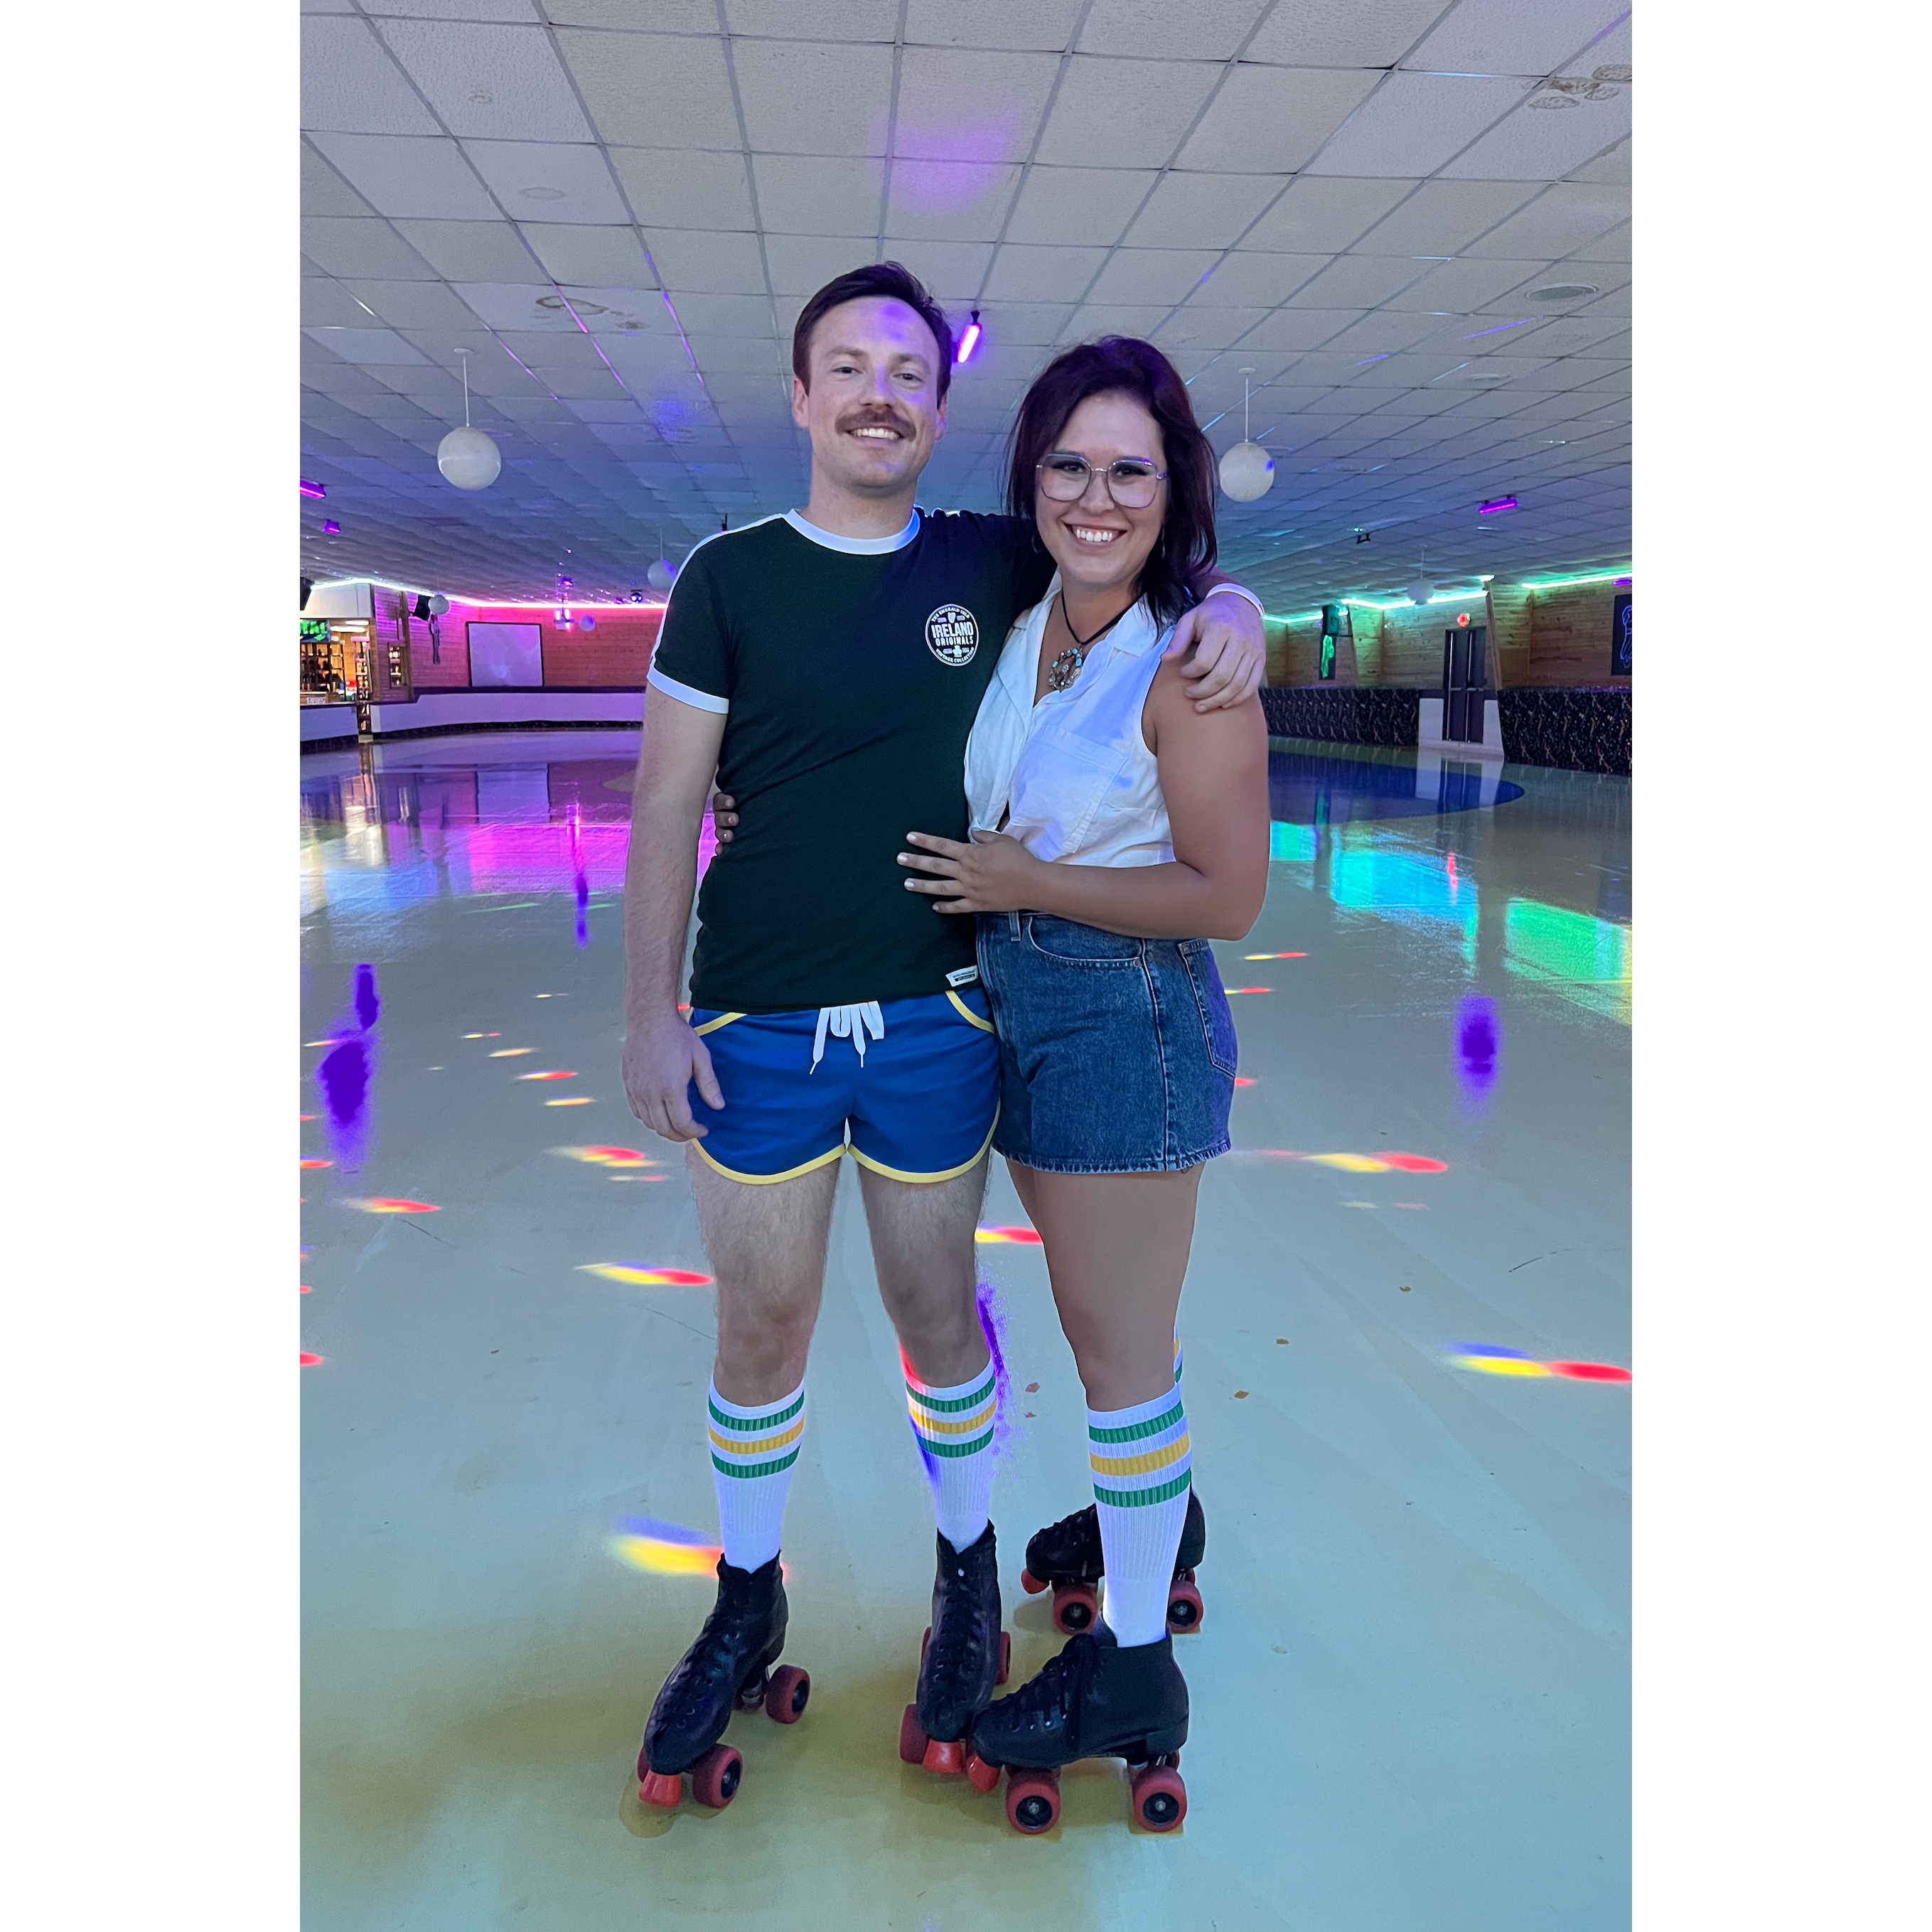 Chelsea's (and Sarah's!) 34th birthday party. 80's skating theme!